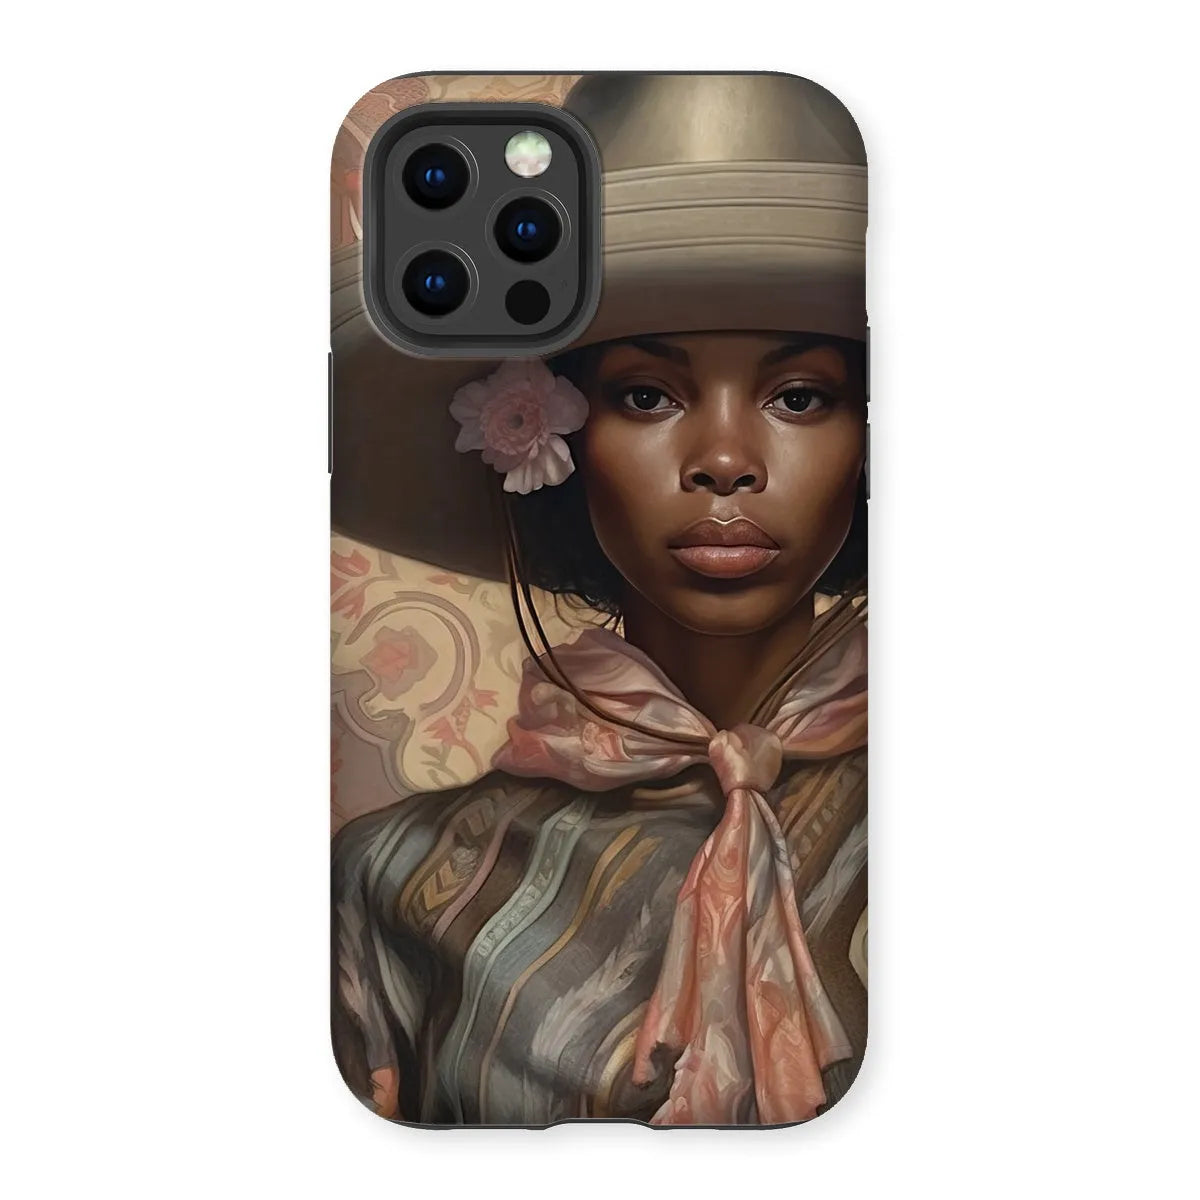 Sadie The Lesbian Cowgirl - Sapphic Art Phone Case - Iphone 12 Pro / Matte - Mobile Phone Cases - Aesthetic Art